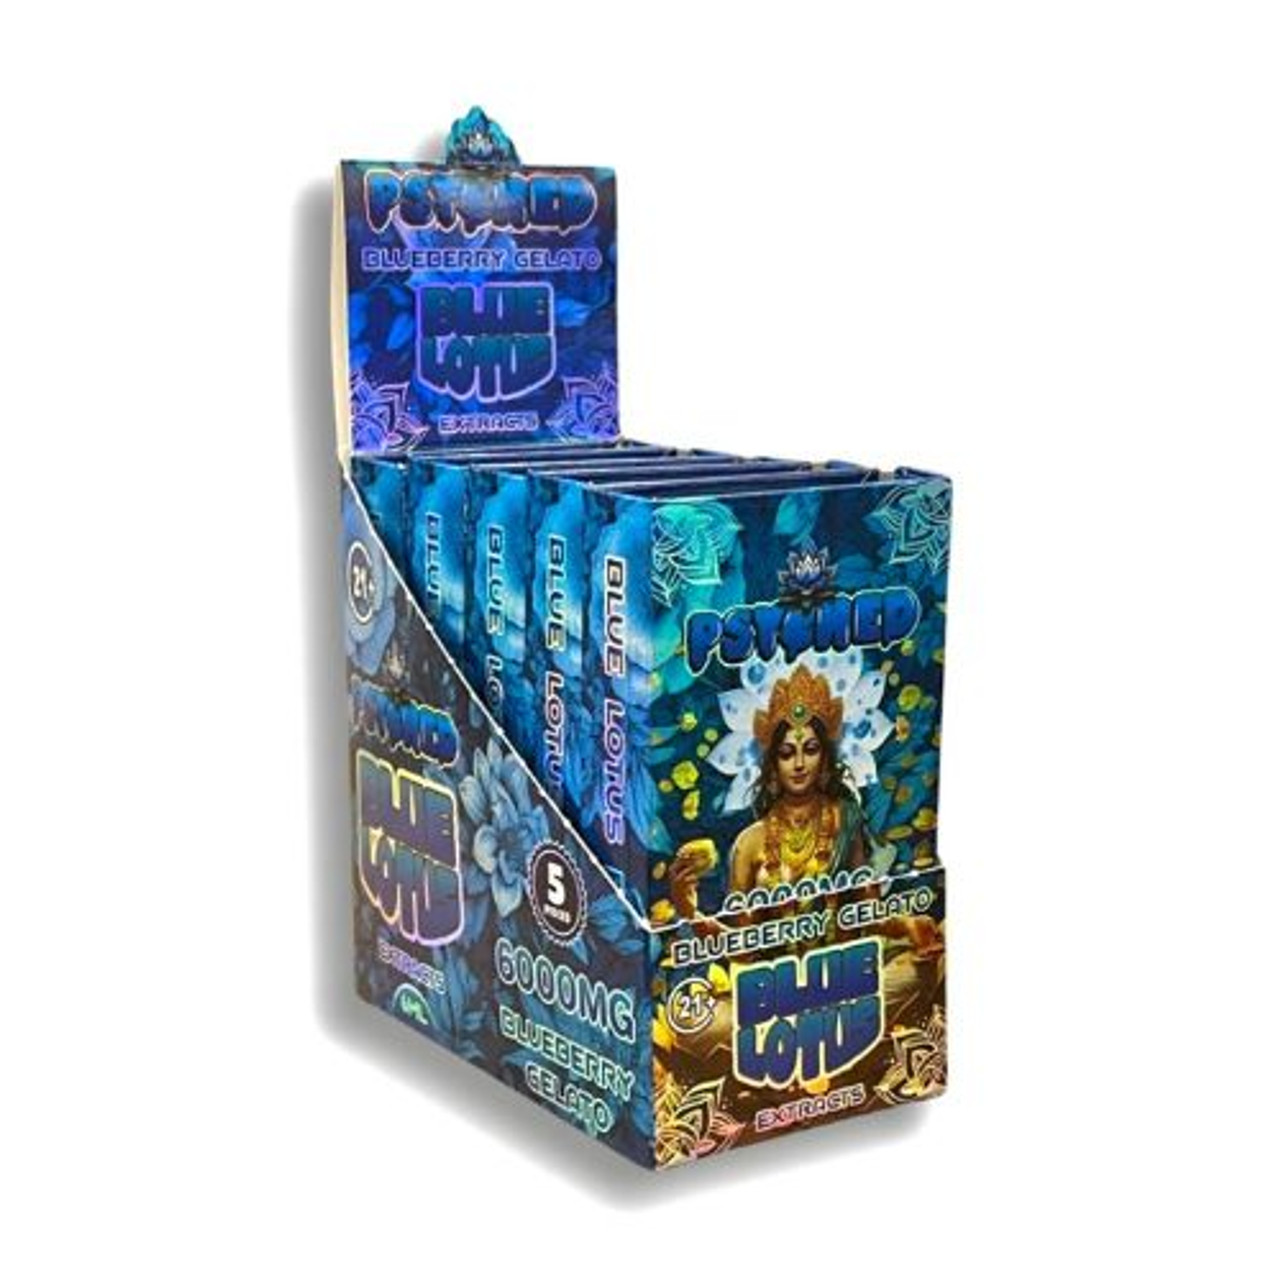 Psyched Blue Lotus 6ml Disposable Vape - 5 ct. Display